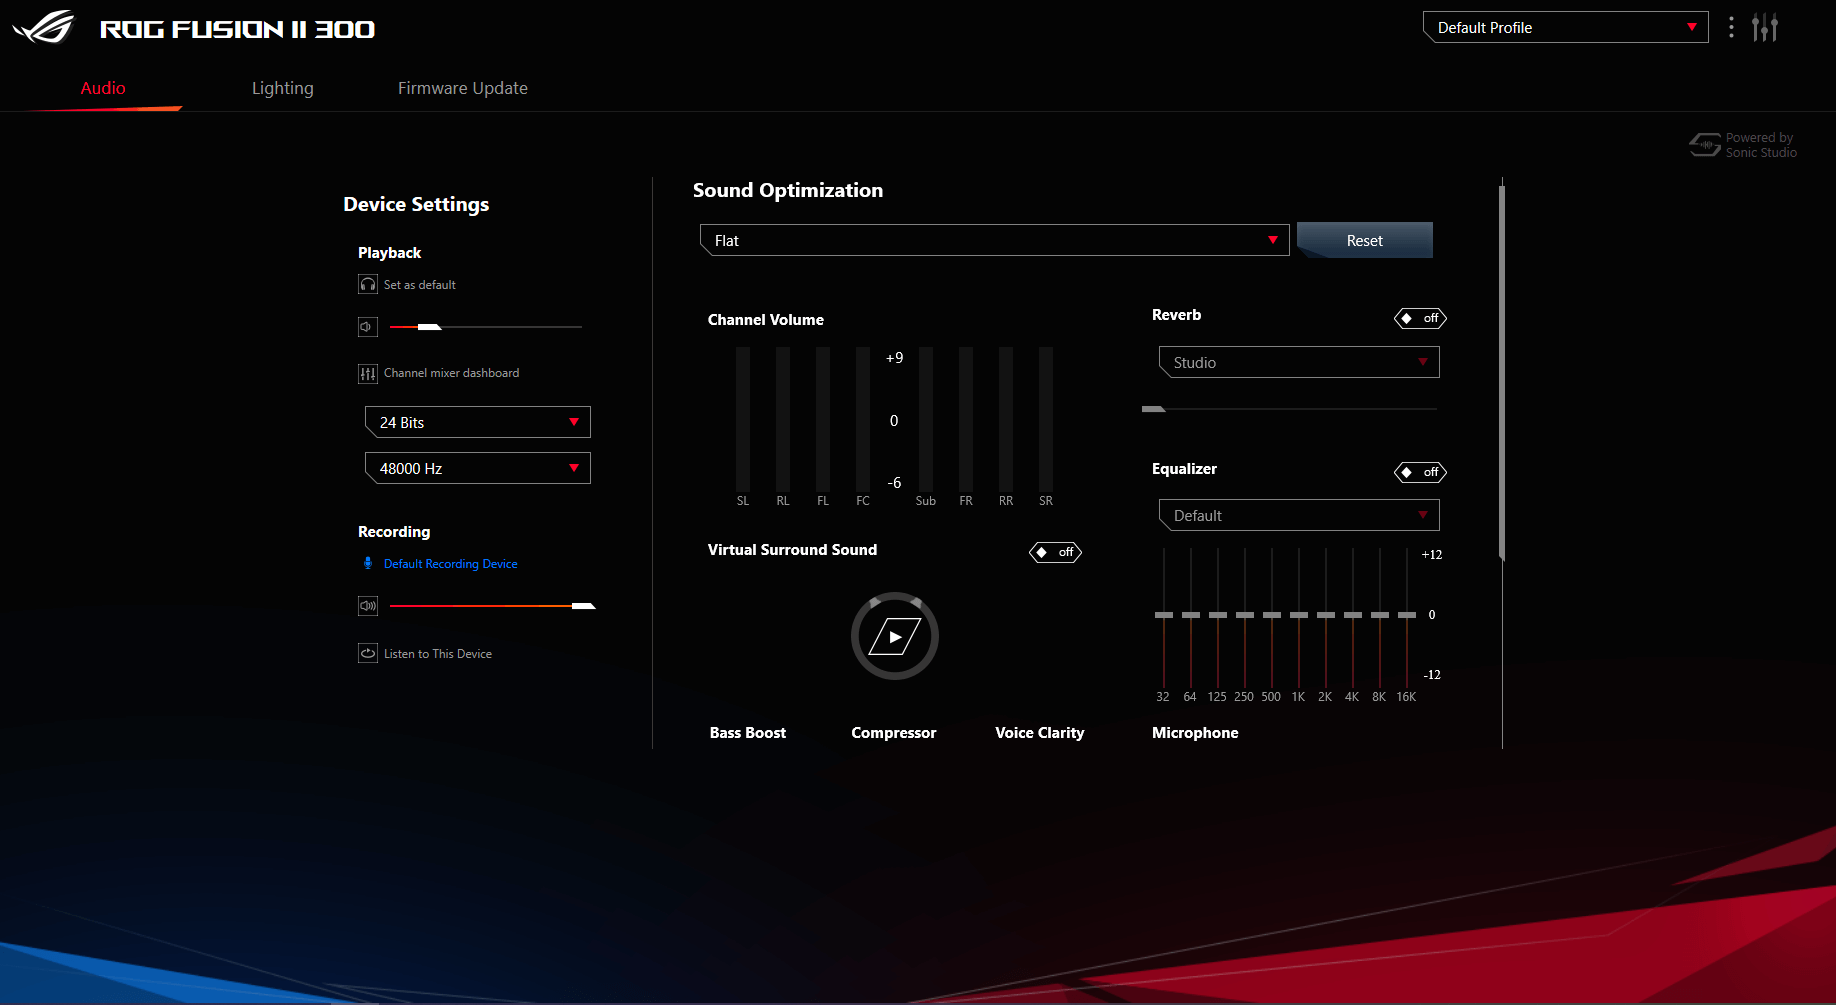 The picture shows the Armoury Crate interface of audio profile.